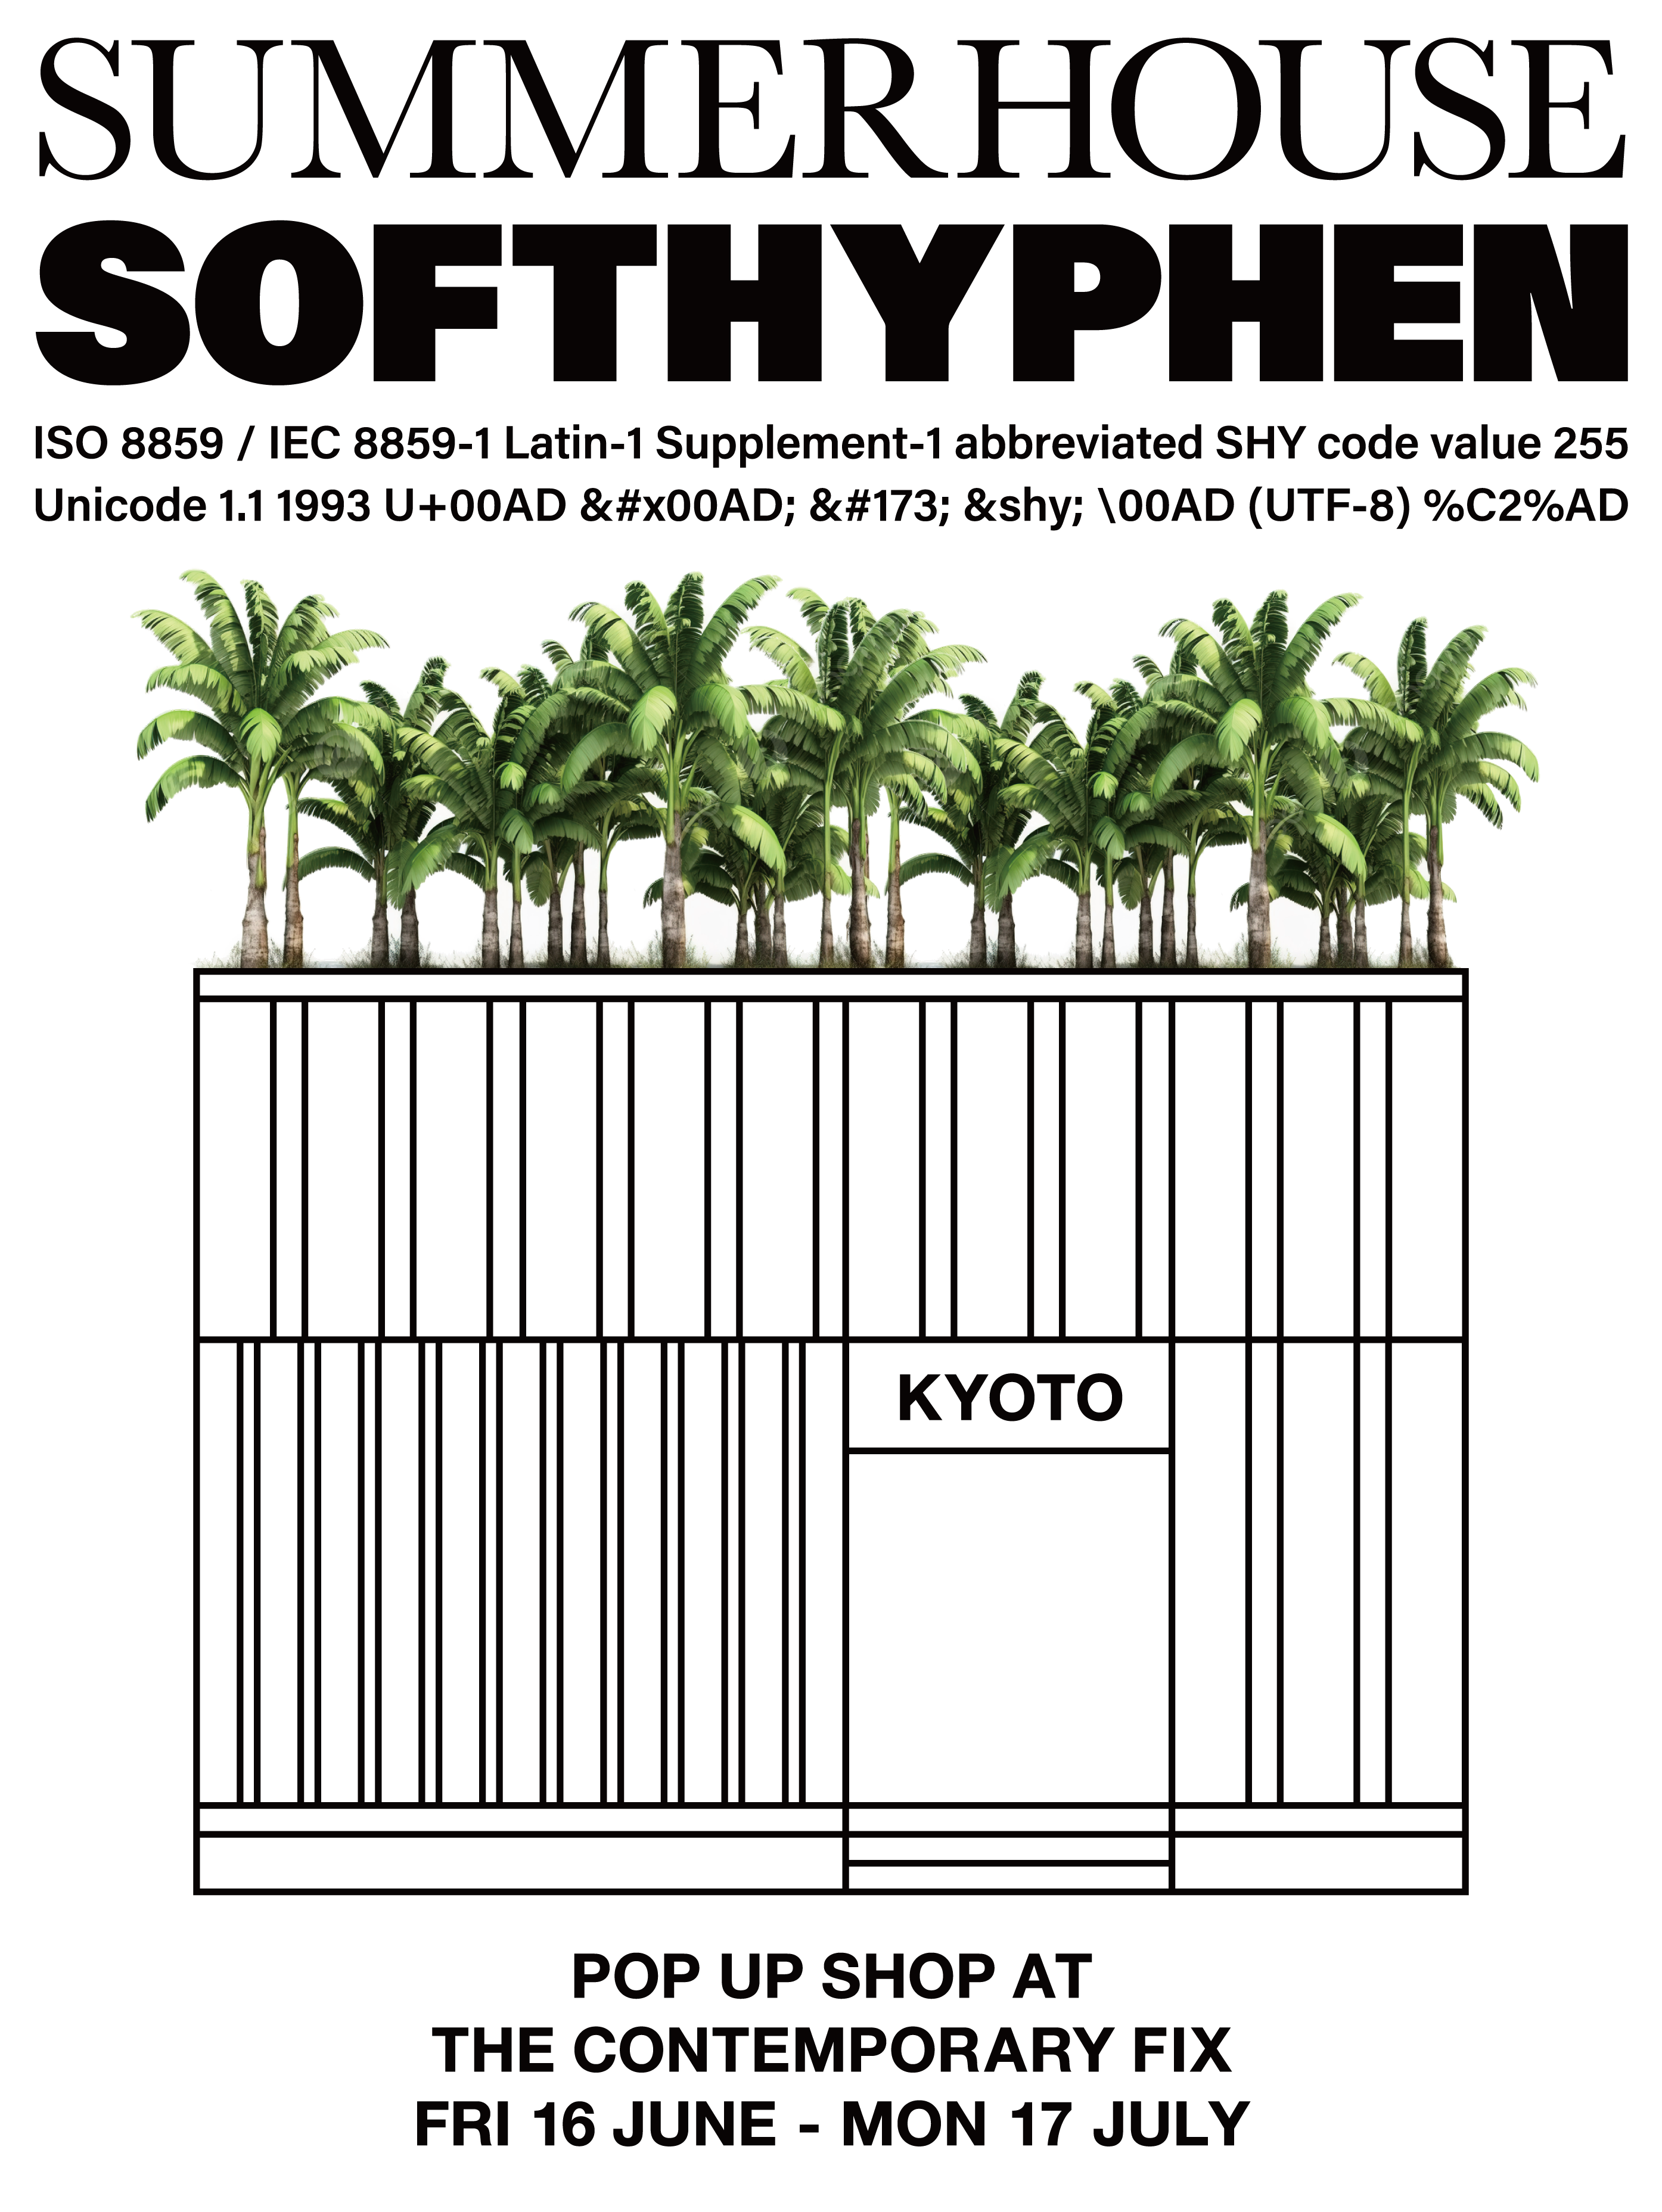 SOFTHYPHEN THE HOUSE